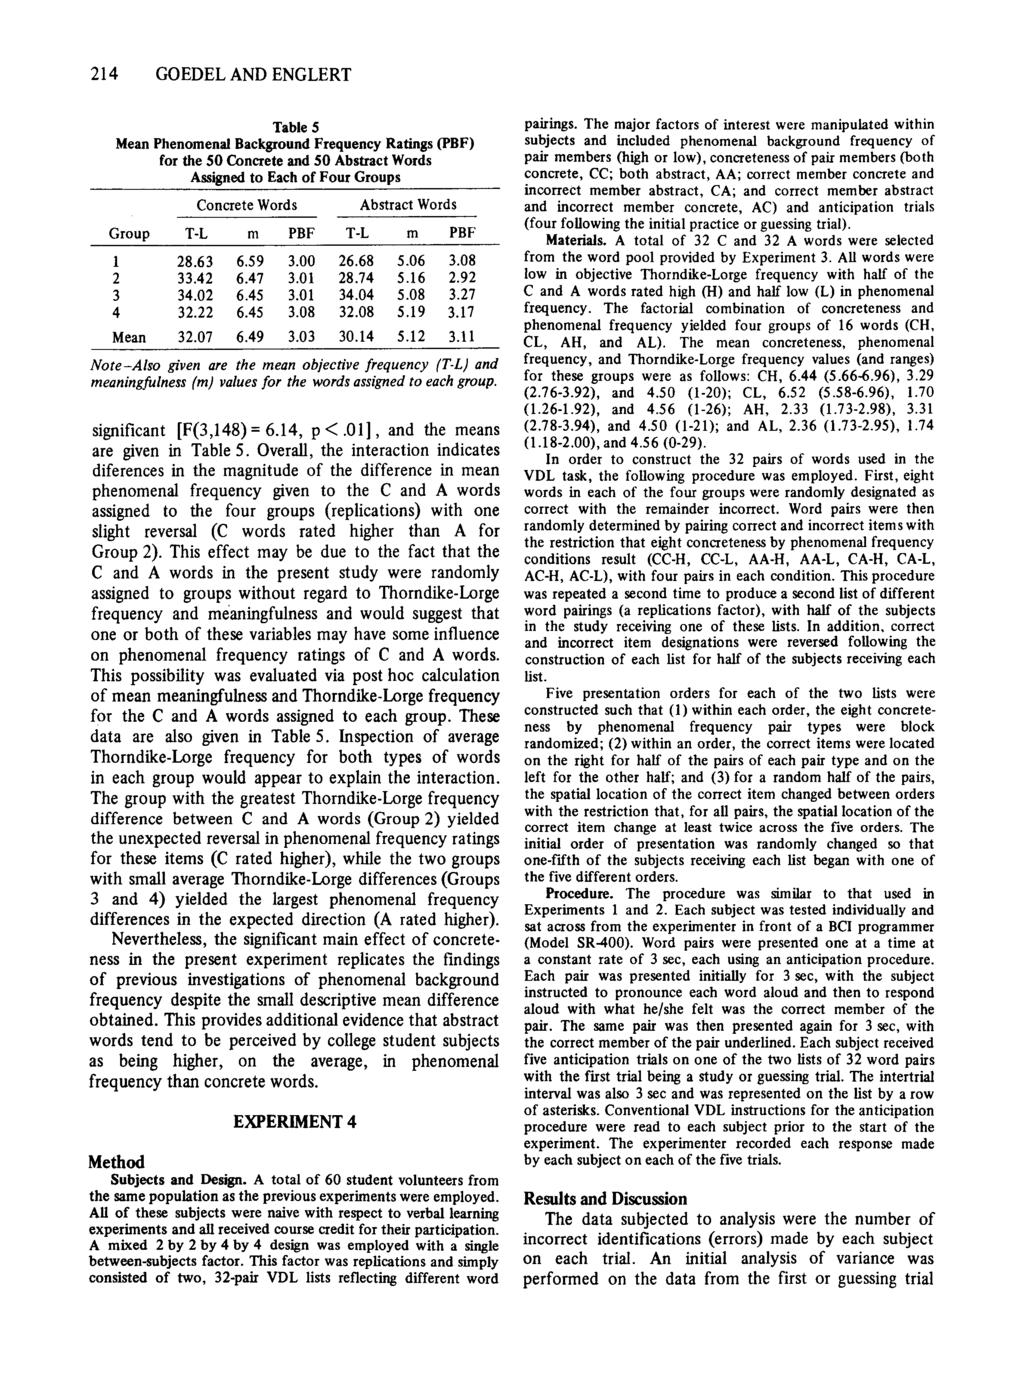 214 GOEDEL AND ENGLERT Table 5 Mean Phenomenal Background Frequency Ratings (PBF) for the 50 Concrete and 50 Abstract Words Assigned to Each of Four Groups Concrete Words Abstract Words Group T-L m